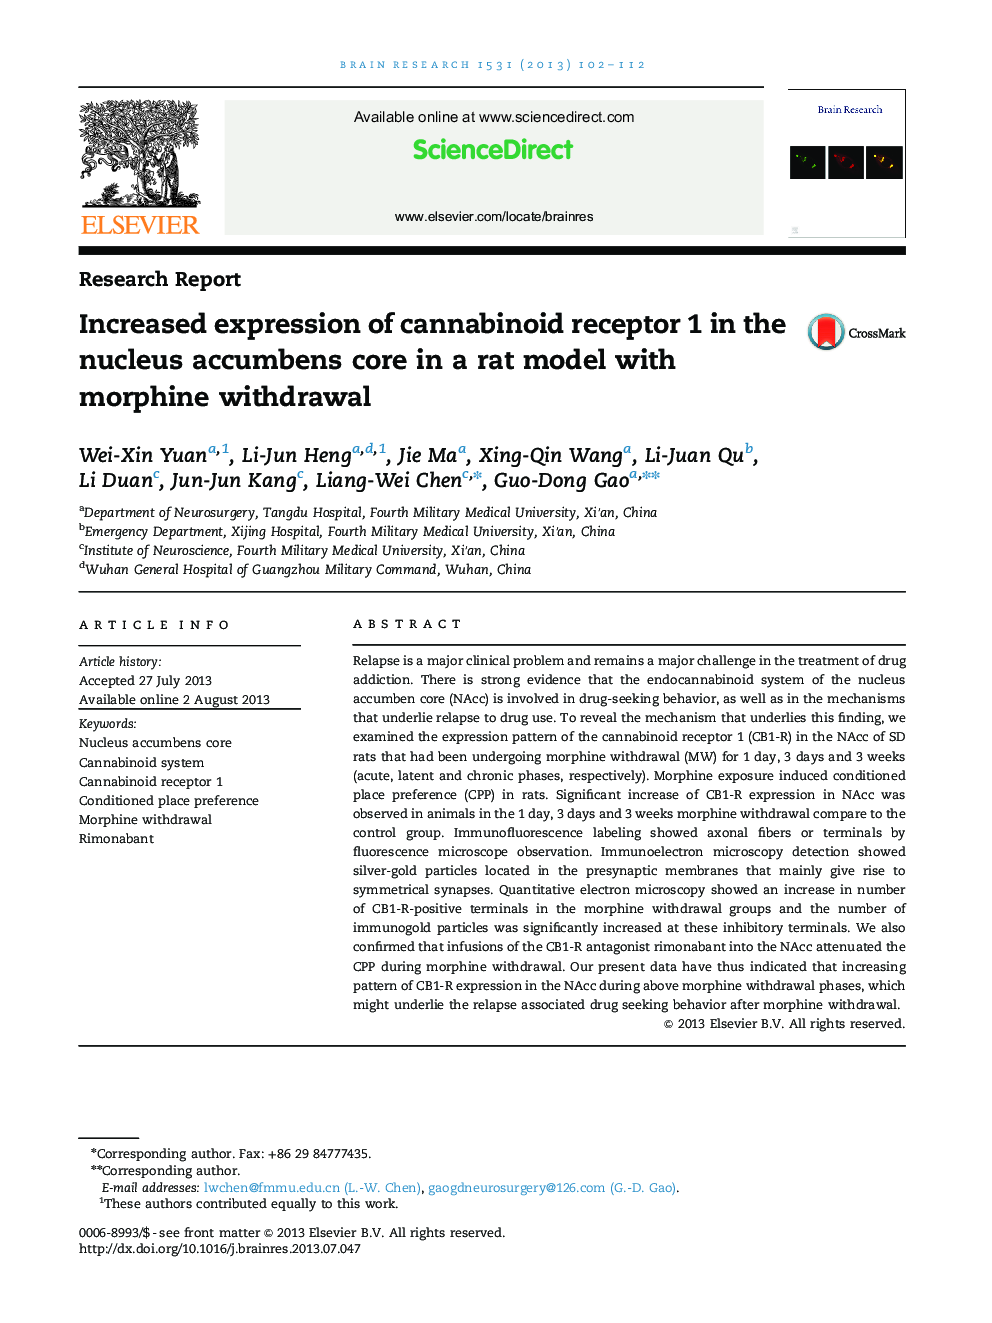 Research ReportIncreased expression of cannabinoid receptor 1 in the nucleus accumbens core in a rat model with morphine withdrawal